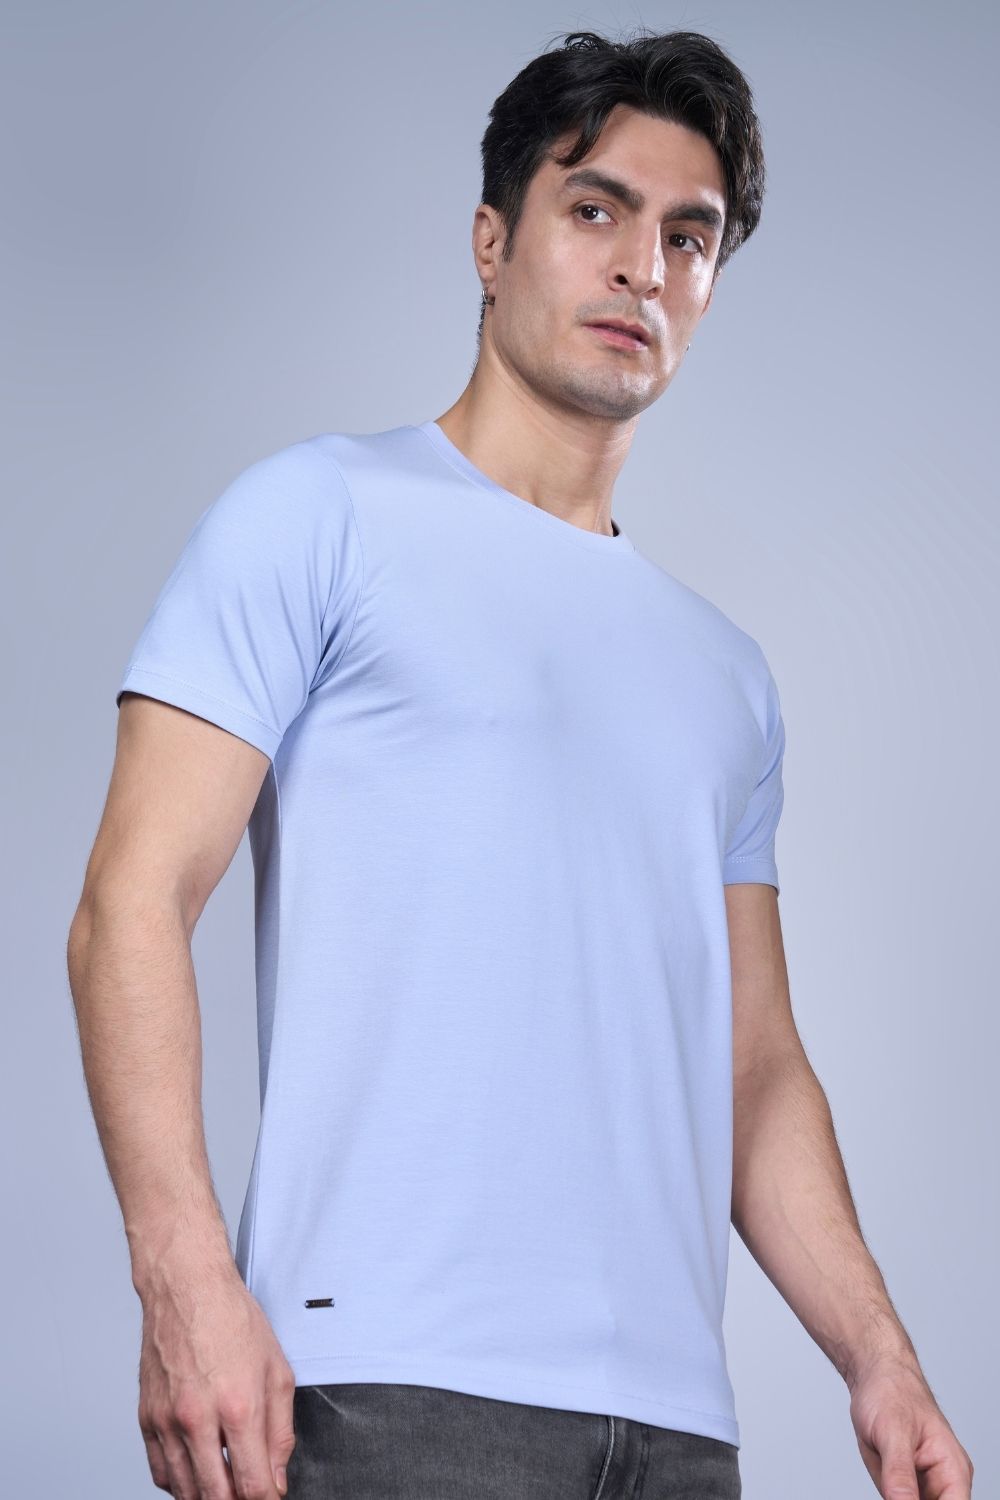 A model wearing Cotton Stretch T shirt for men in the the solid color Powder Blue with half sleeves and round neck.